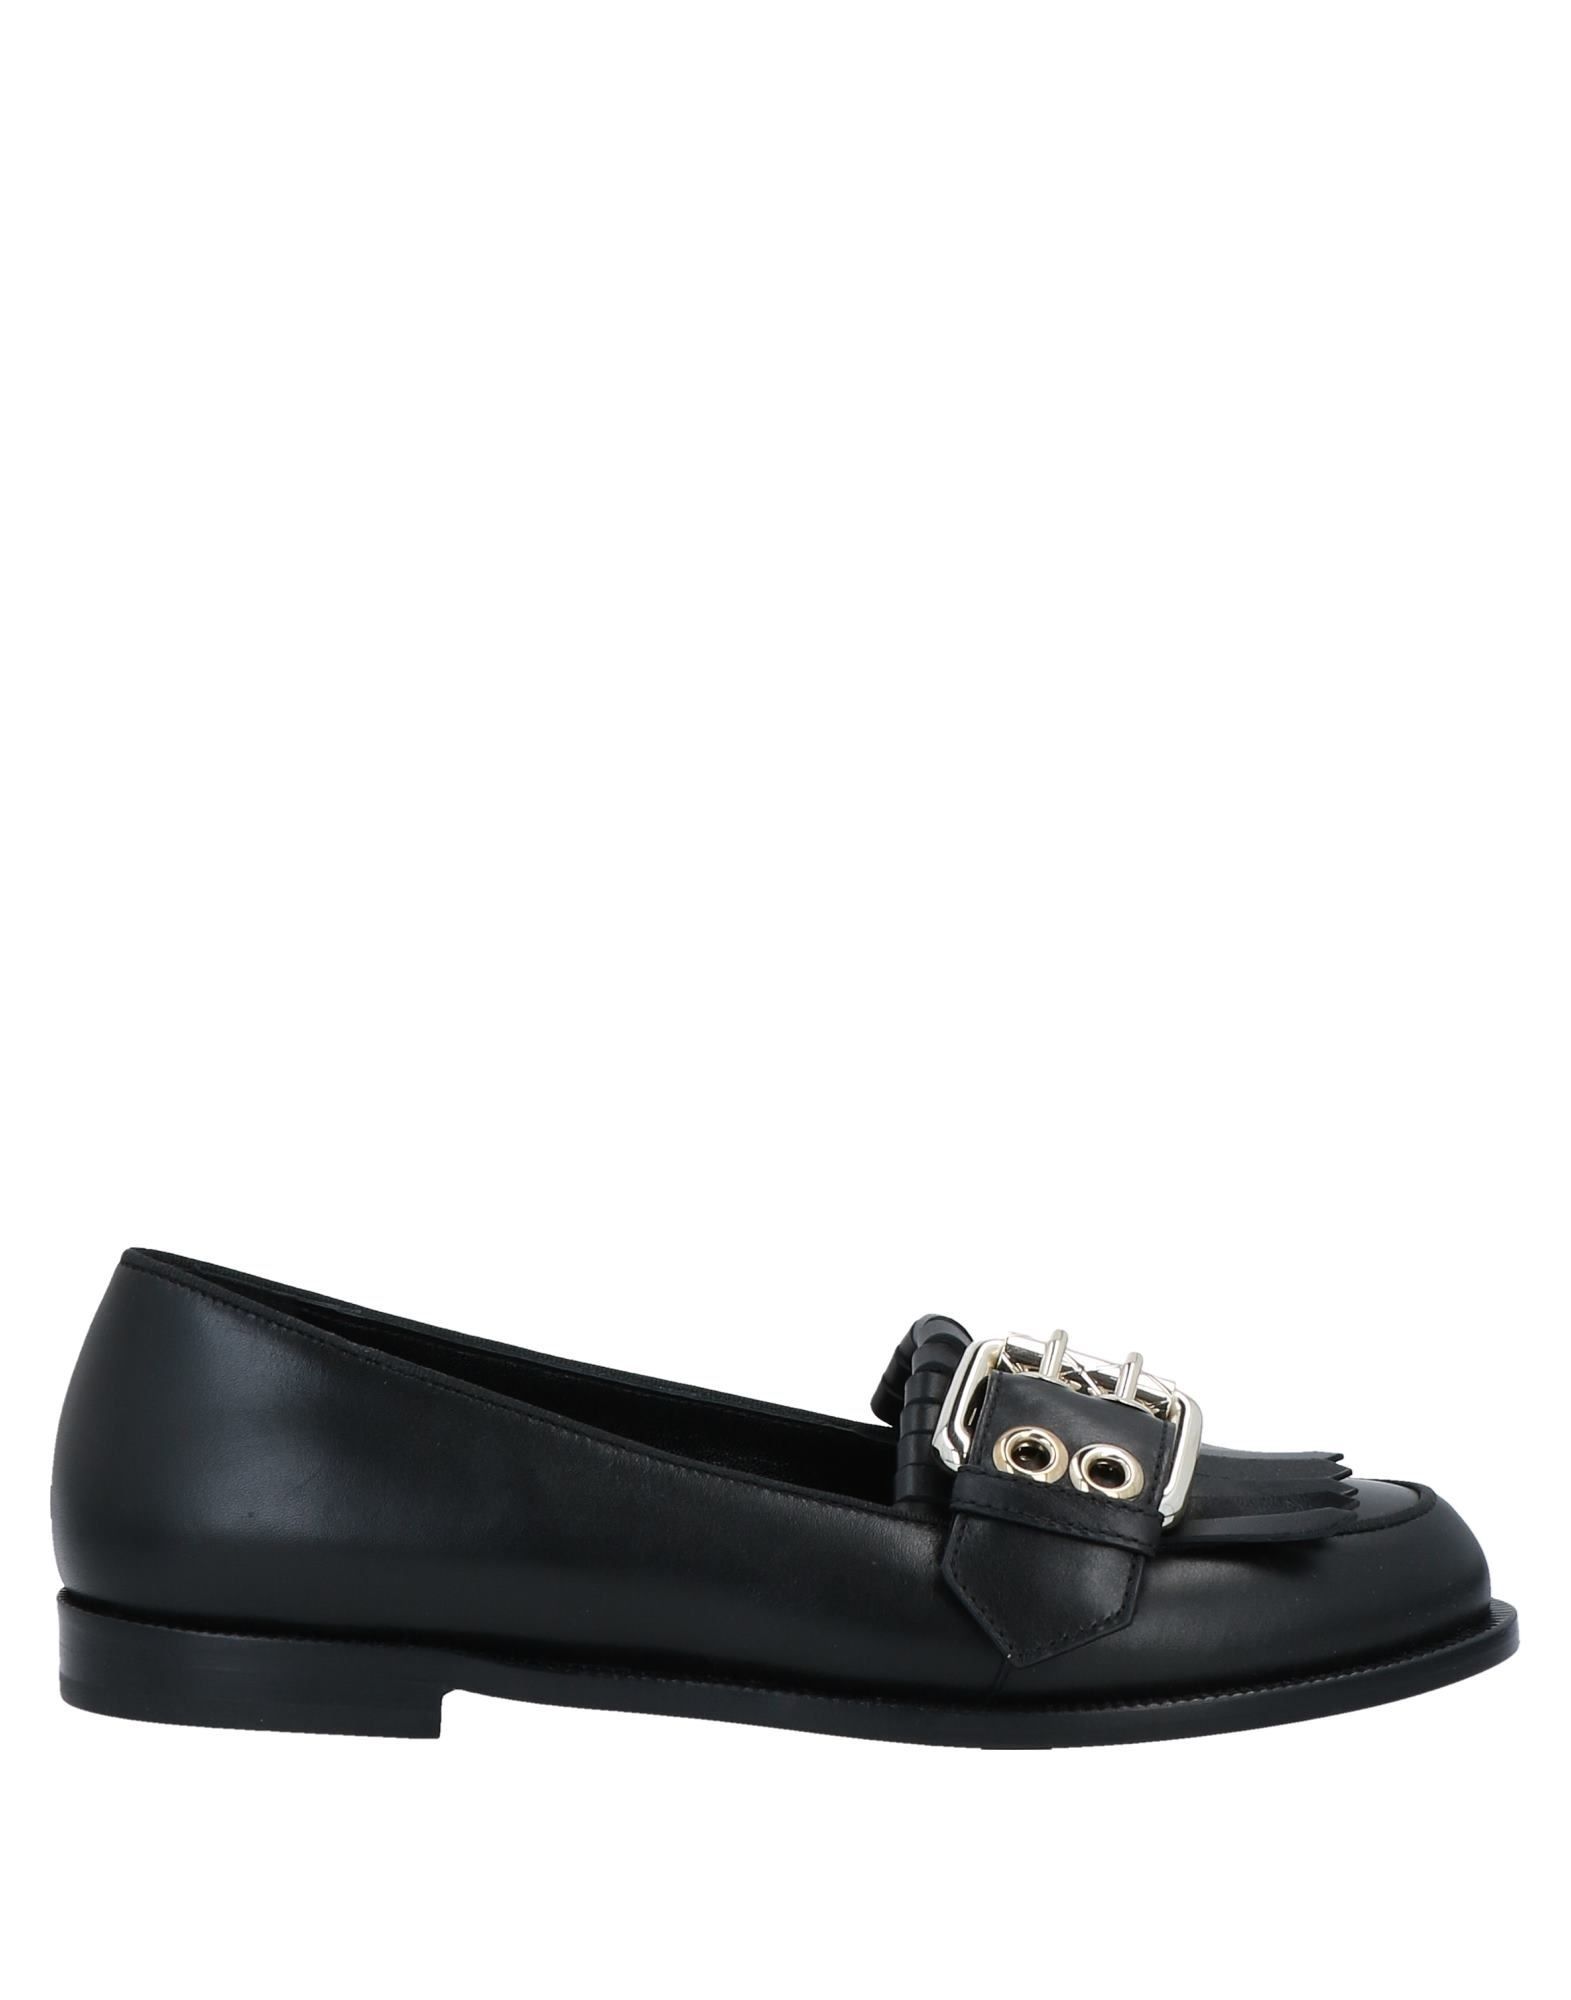 TWINSET Loafers for Women | ModeSens